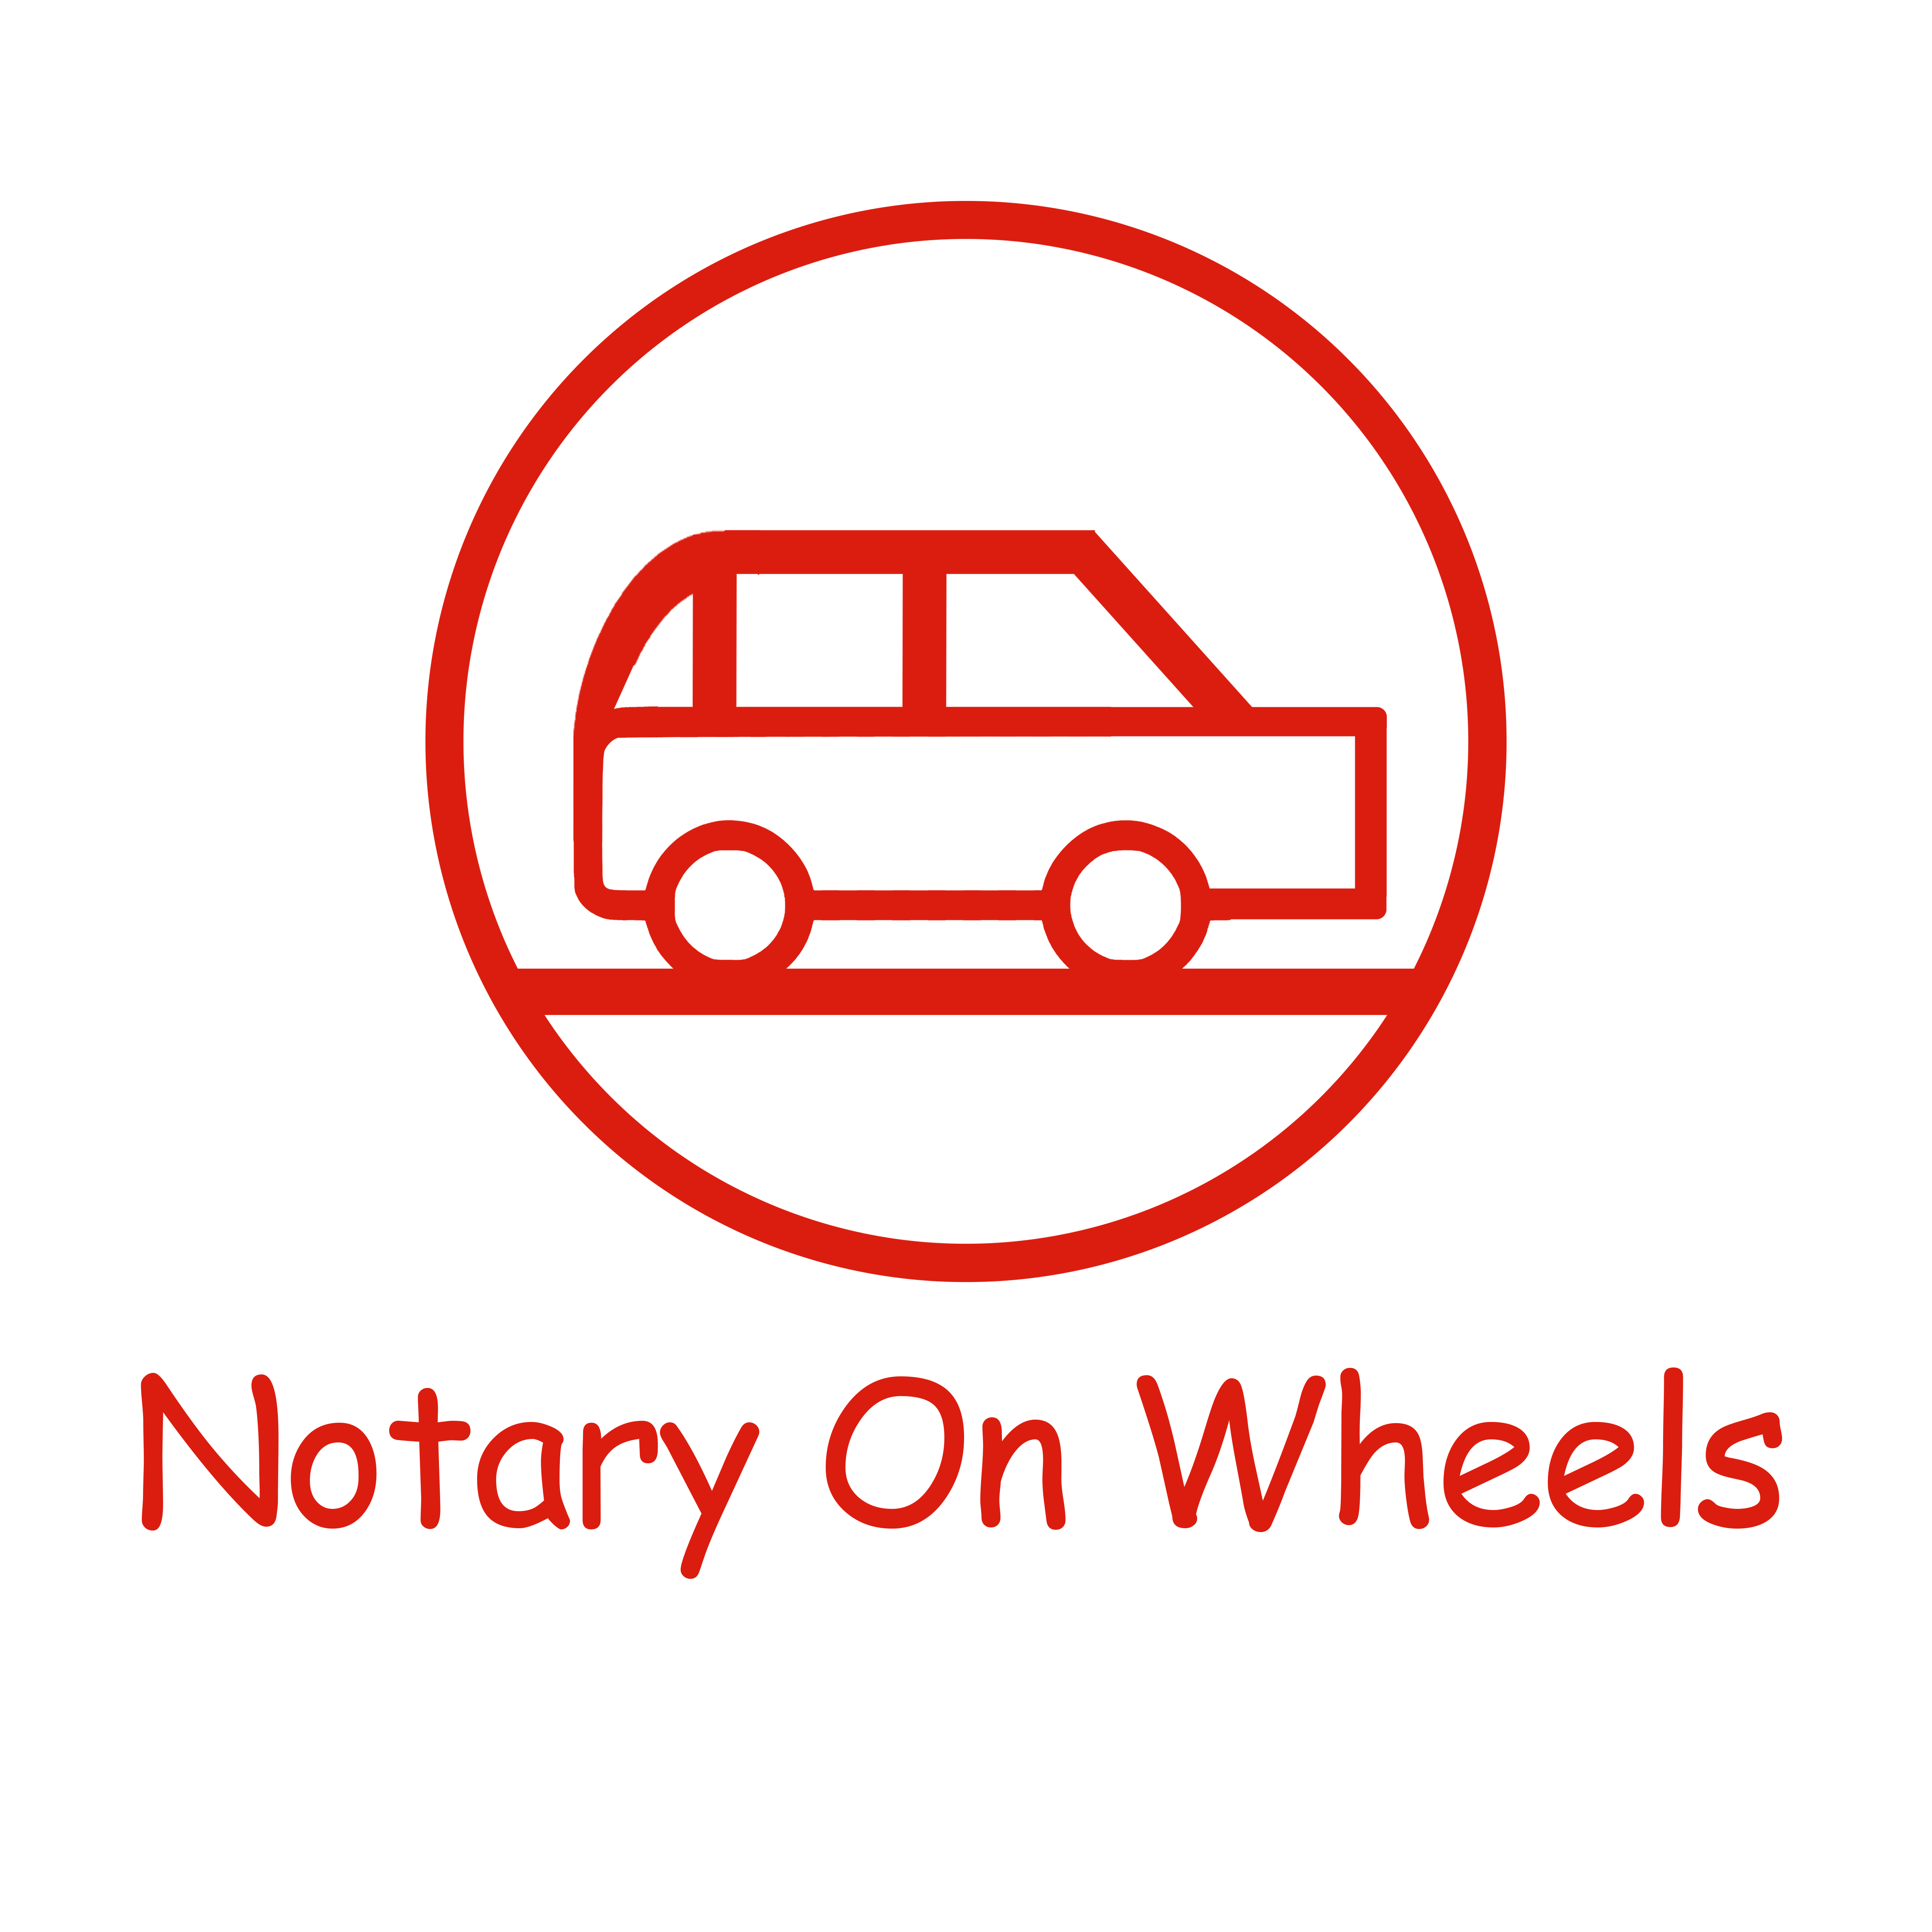 Notary on Wheels